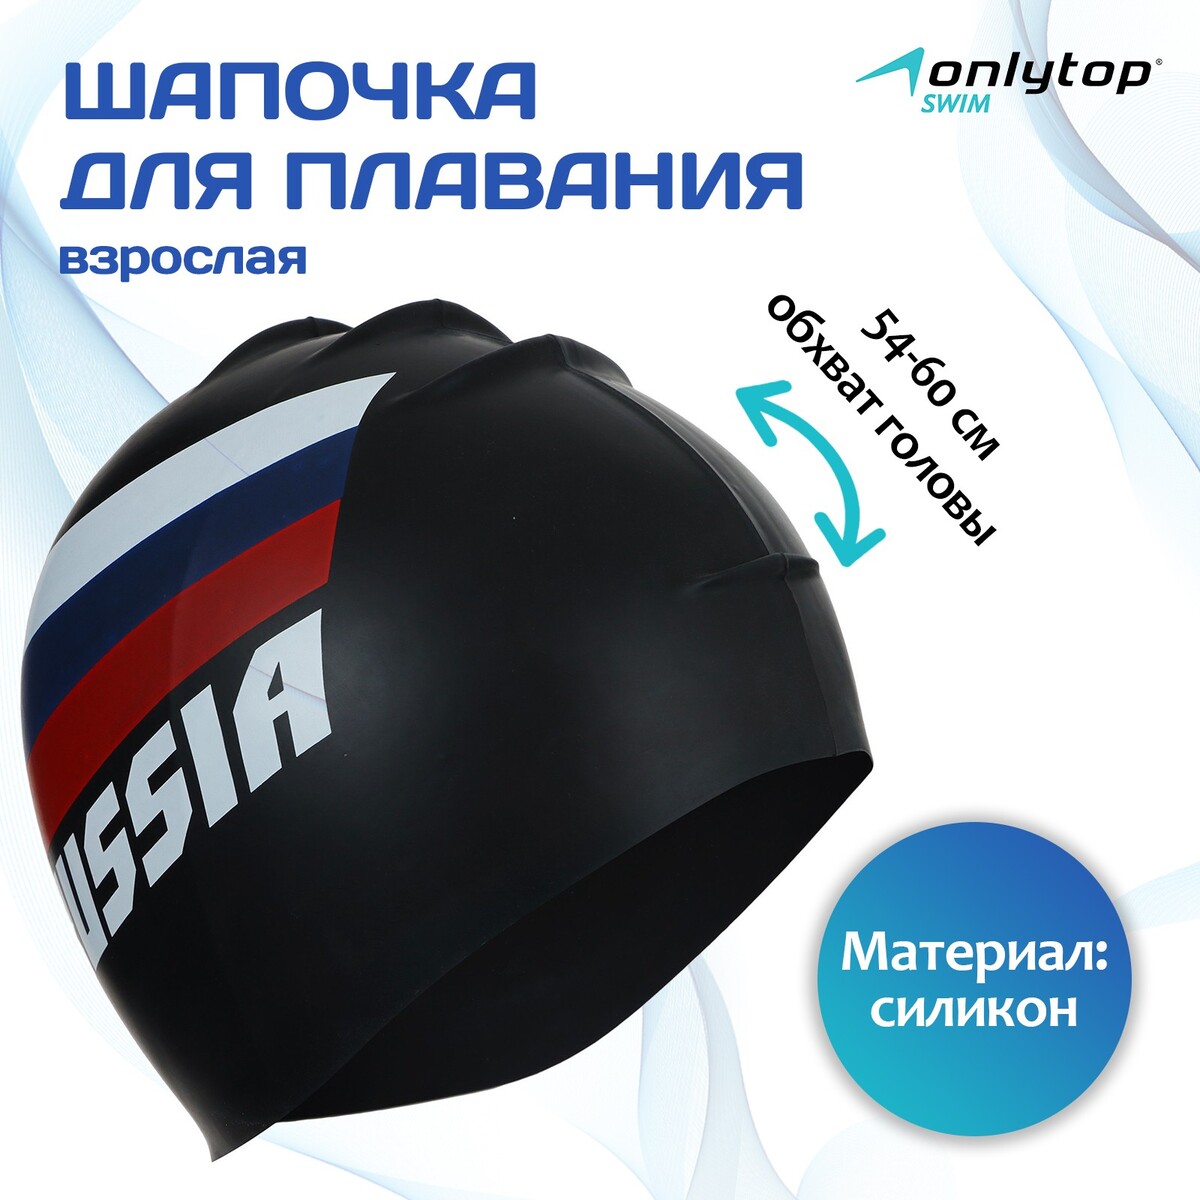     onlytop russia, ,  54-60 